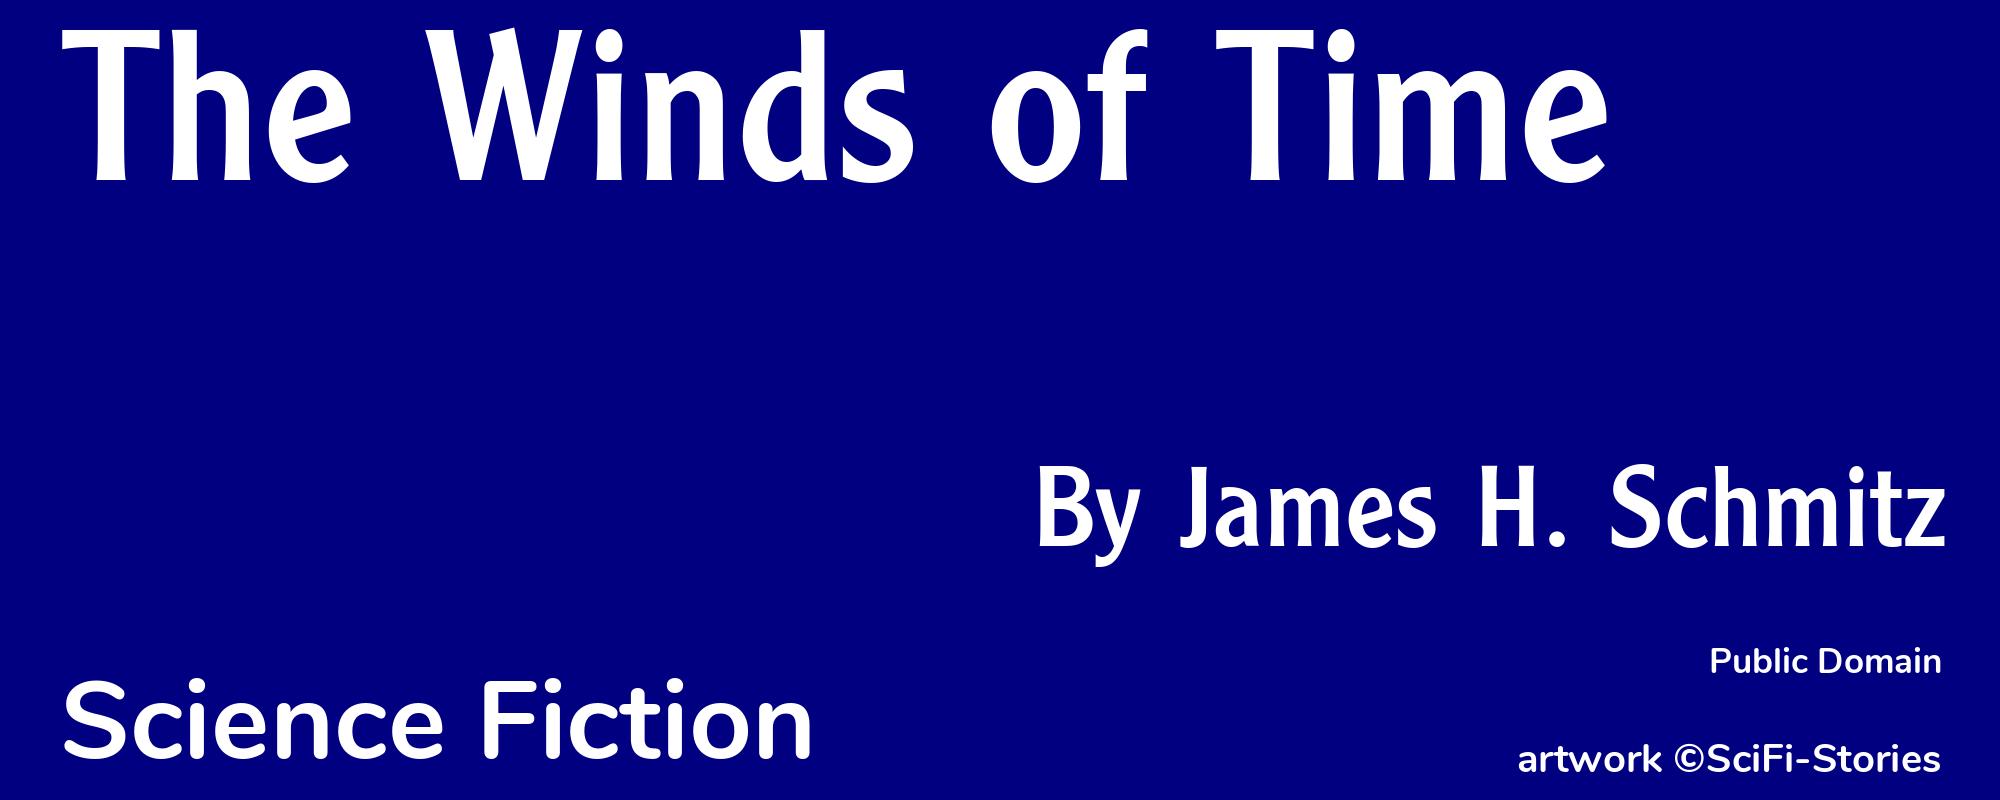 The Winds of Time - Cover